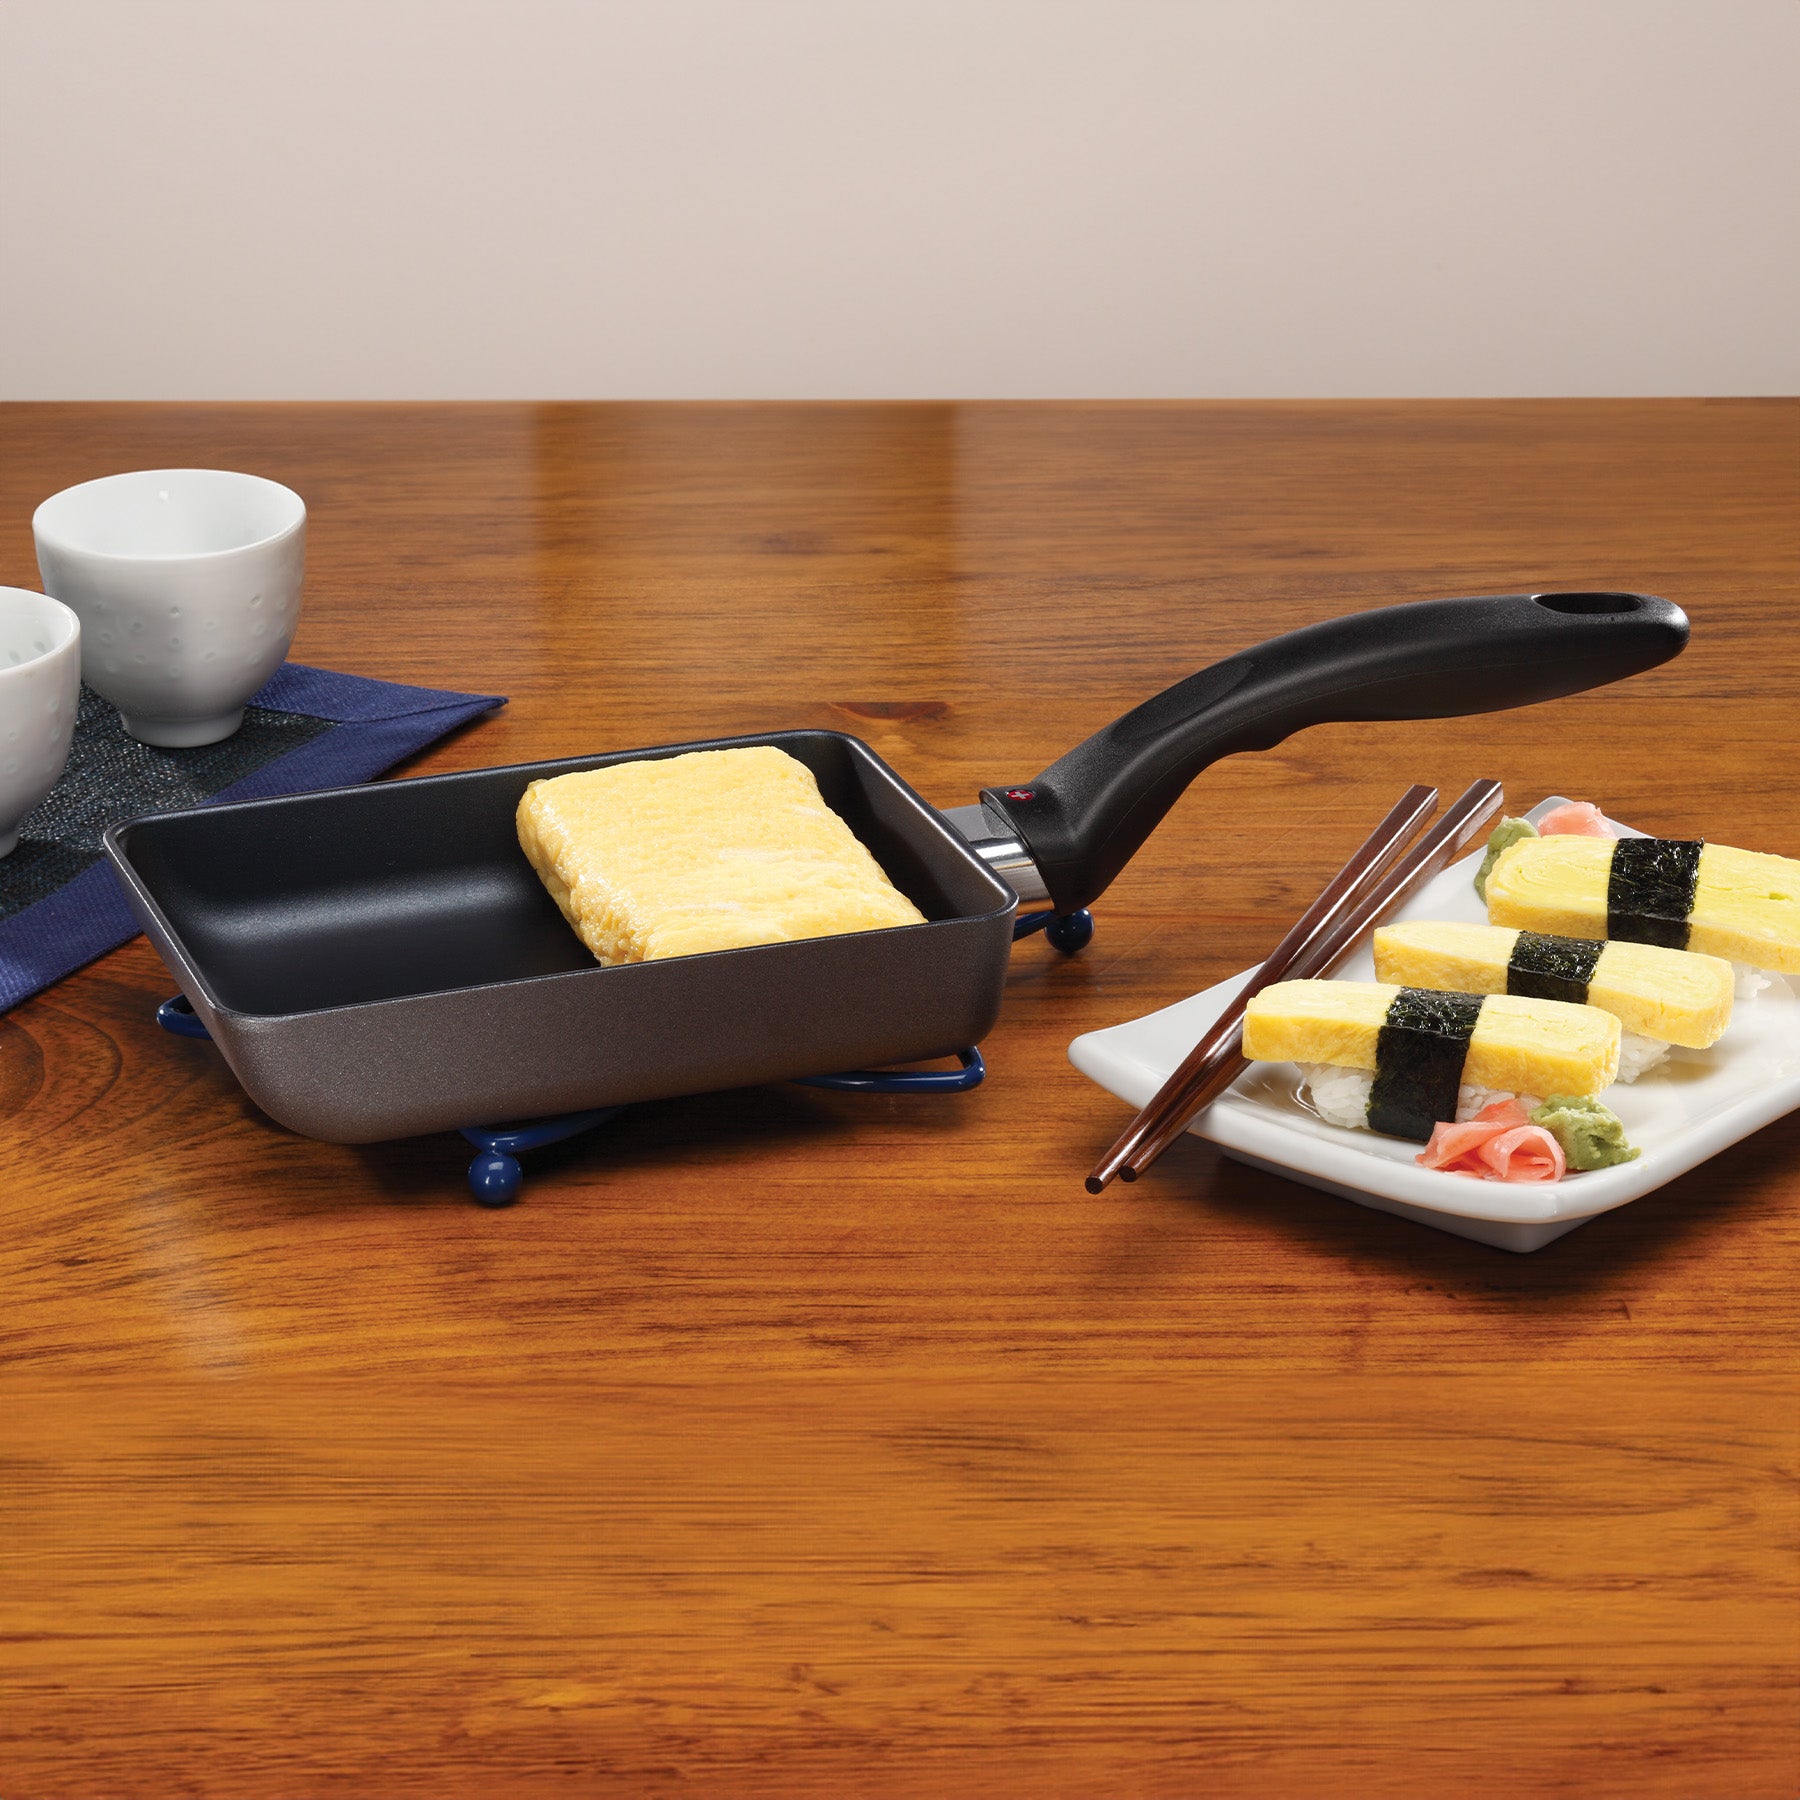 HD Nonstick 5" x 7" Japanese Omelet Pan - Induction in use on dining room table